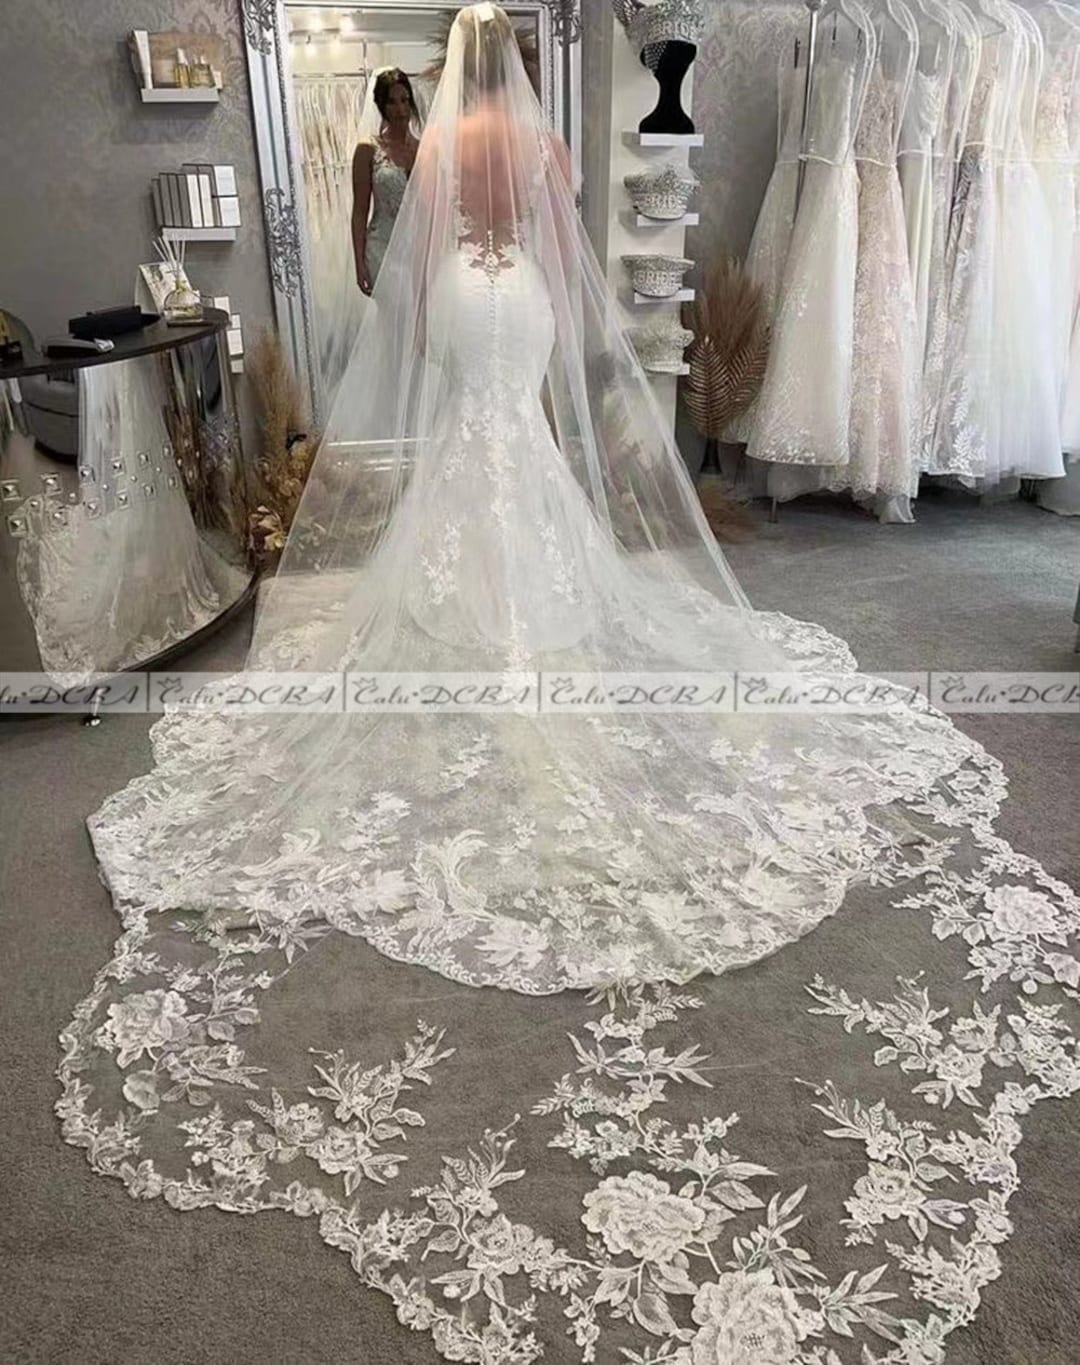 Fantasy Bride Store Elegant 4 Meters Long Lace Edge One Layer Tulle Bridal Veil with Comb White / 350cm